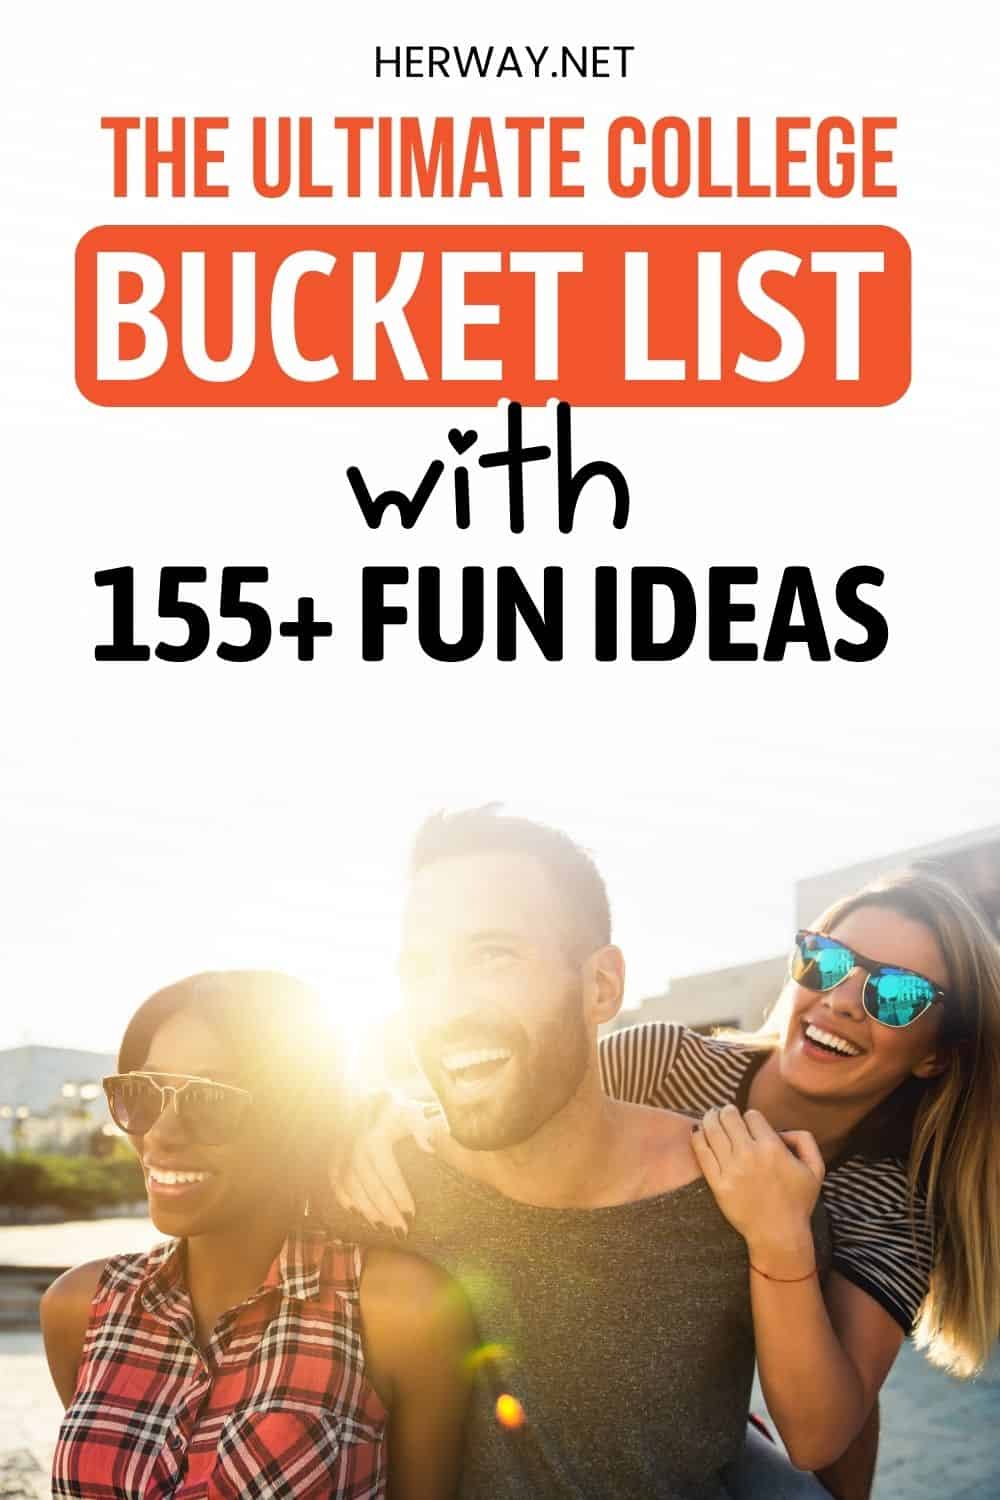 The Ultimate College Bucket List With 155+ Fun Ideas Pinterest